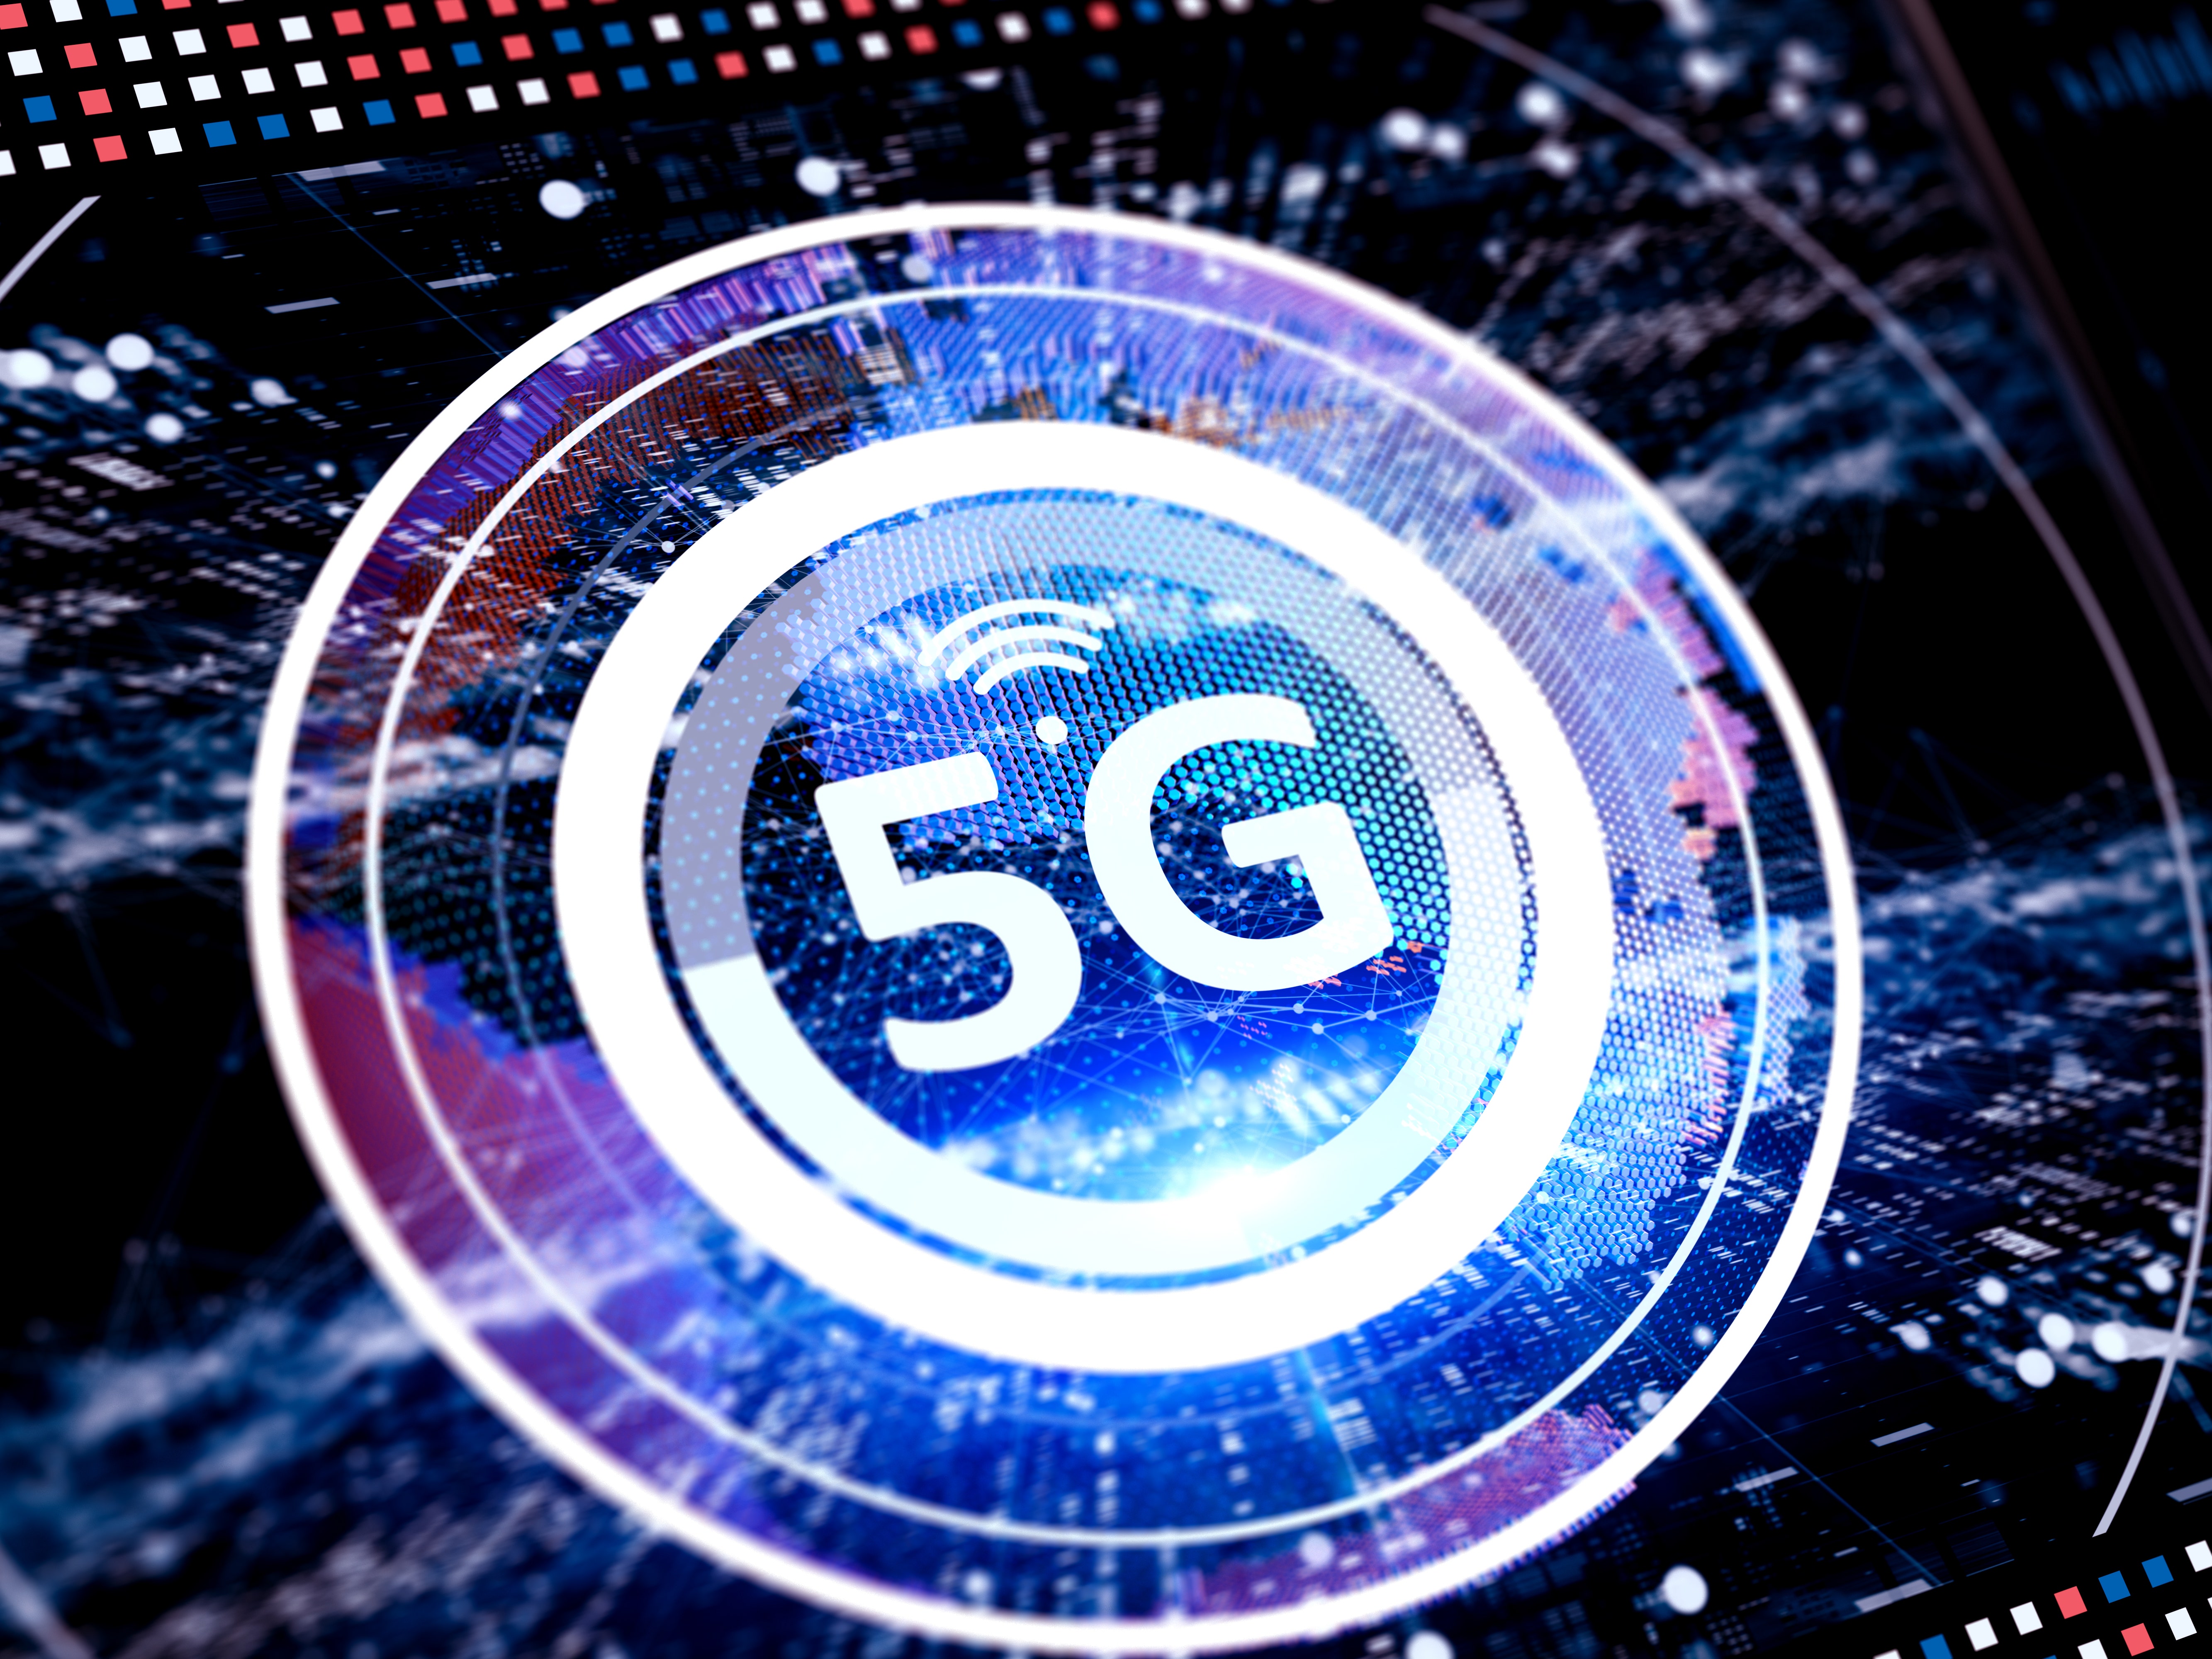 Bring the power of Verizon 5G 7. Experience Verizon's transformational speed and reliability.